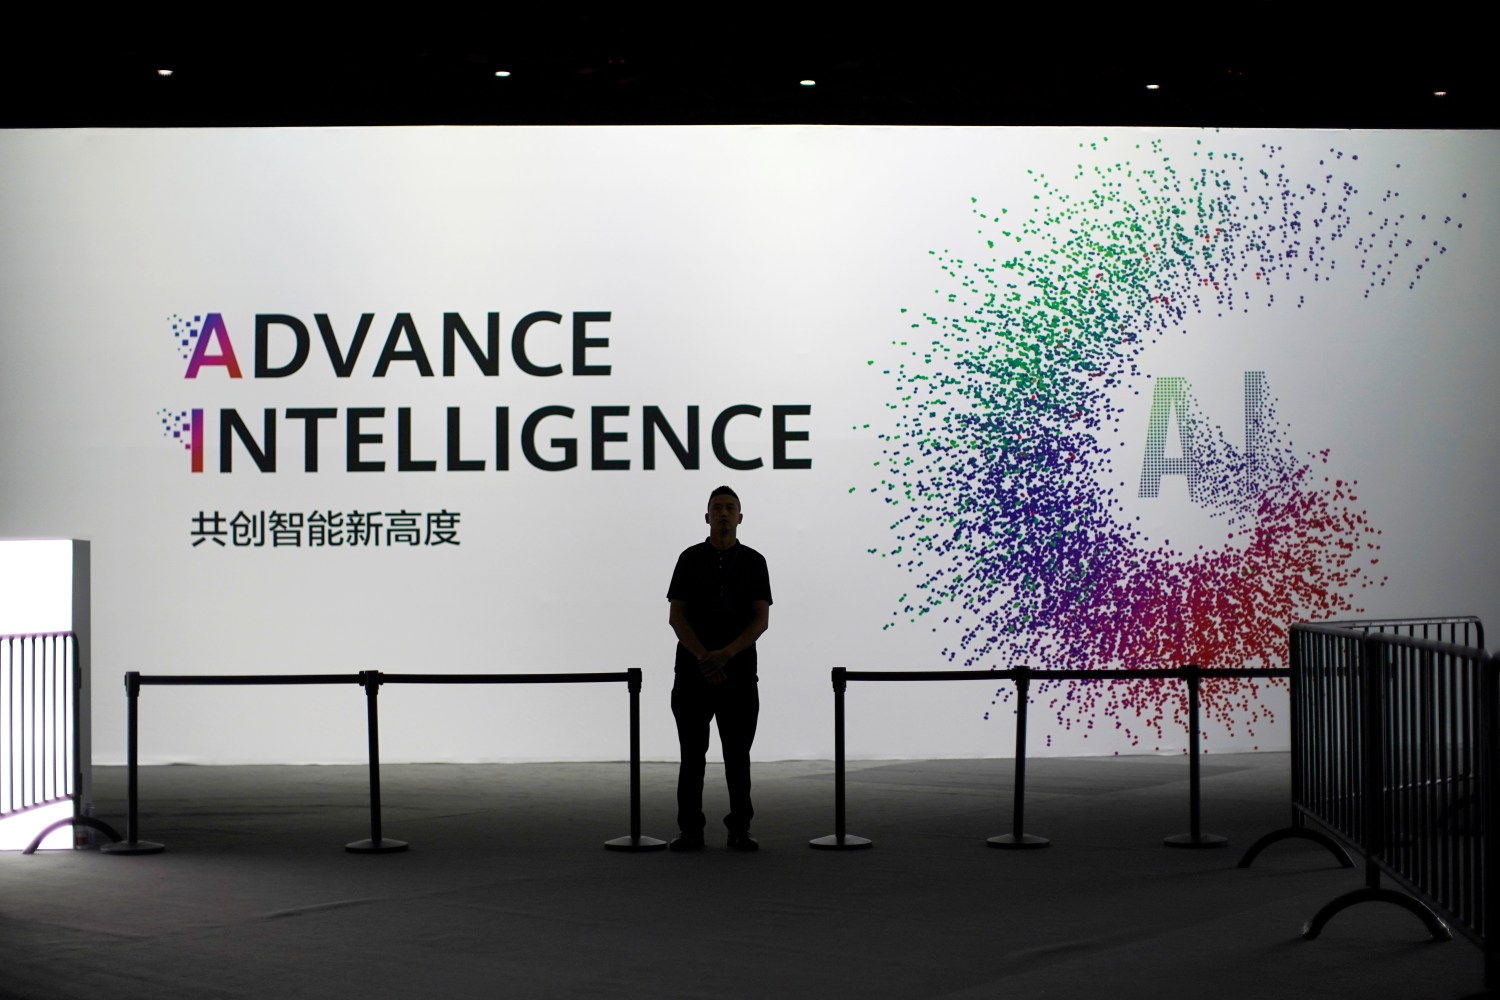 A security officer keeps watch in front of an AI (Artificial Intelligence) sign at the annual Huawei Connect event in Shanghai, China September 18, 2019. REUTERS/Aly Song - RC192A130D00